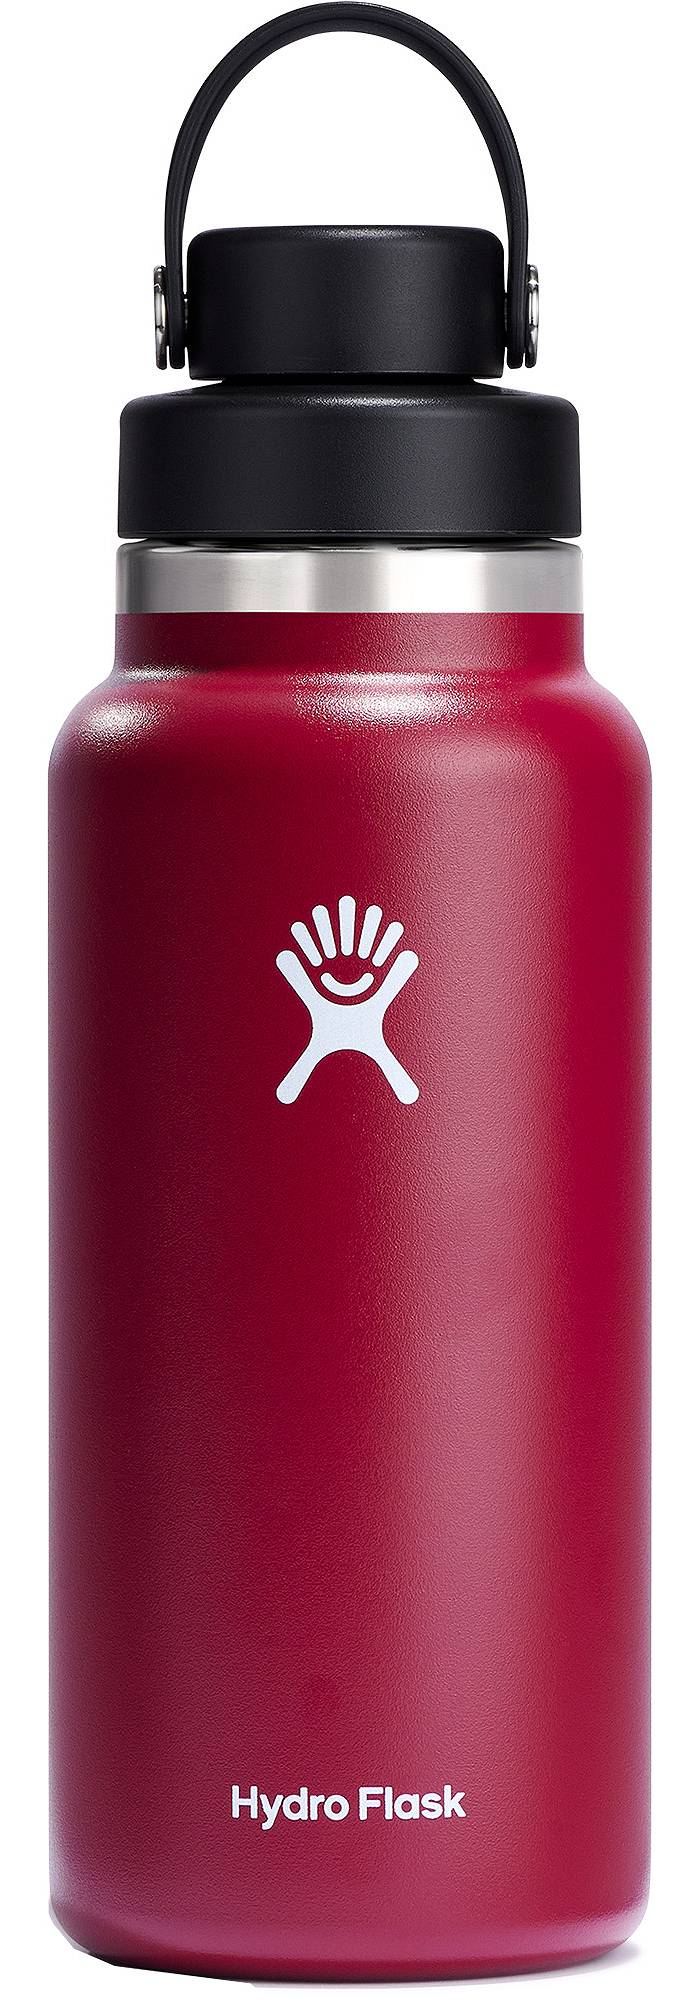 32oz Hydro Flask Water Bottle Stainless Steel Wide Mouth Rose Pink